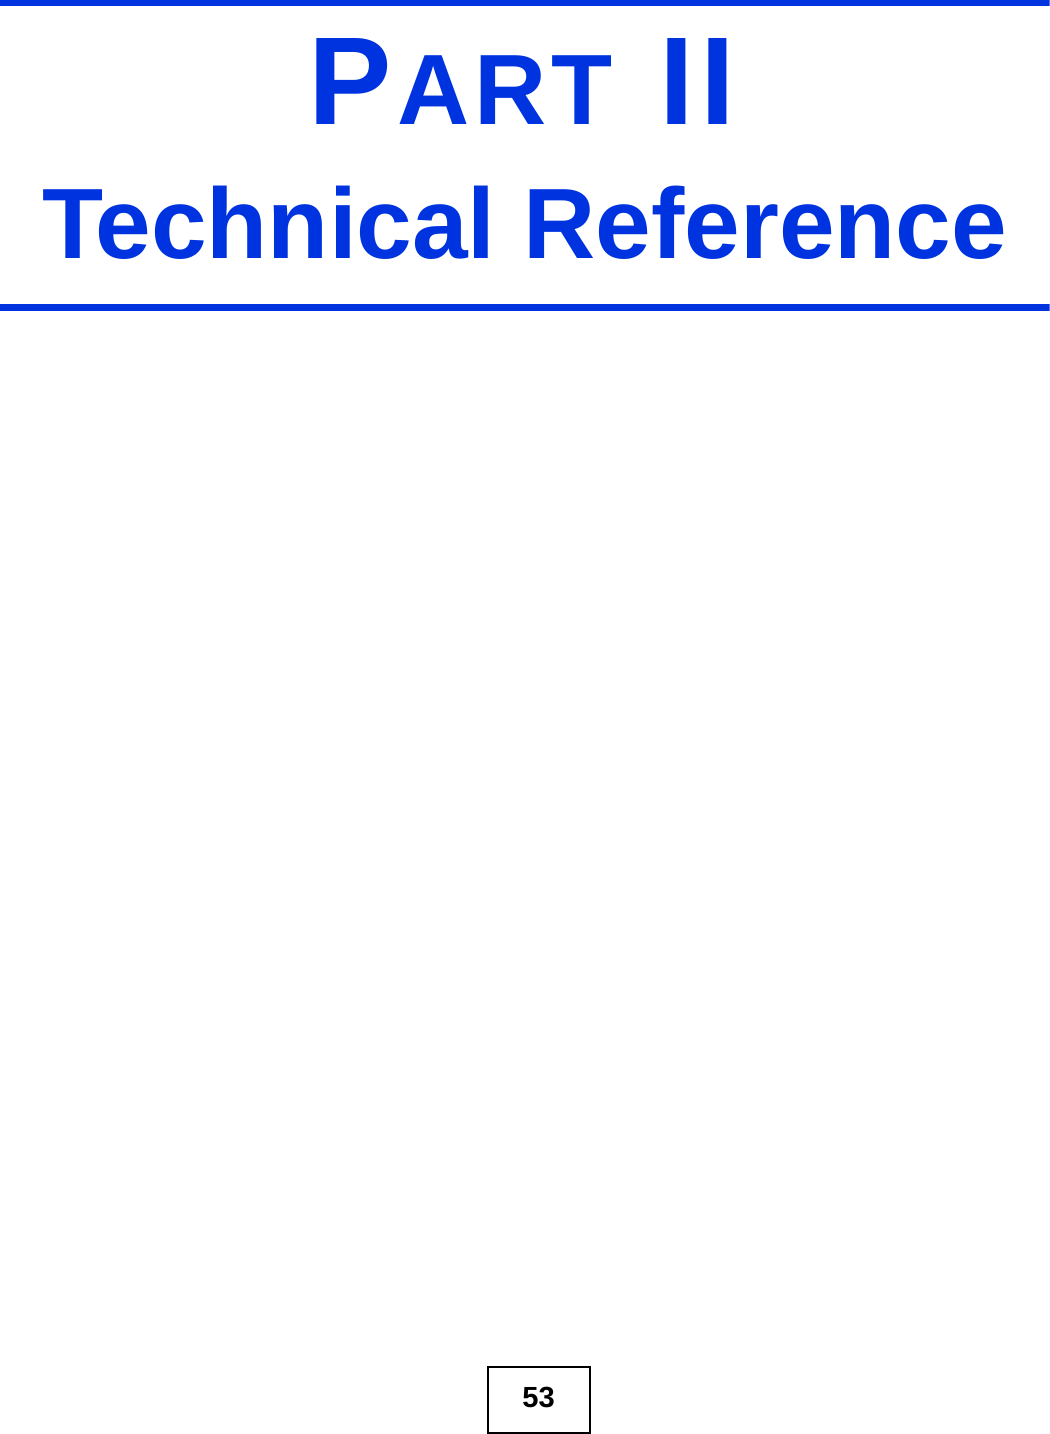 53PART IITechnical Reference